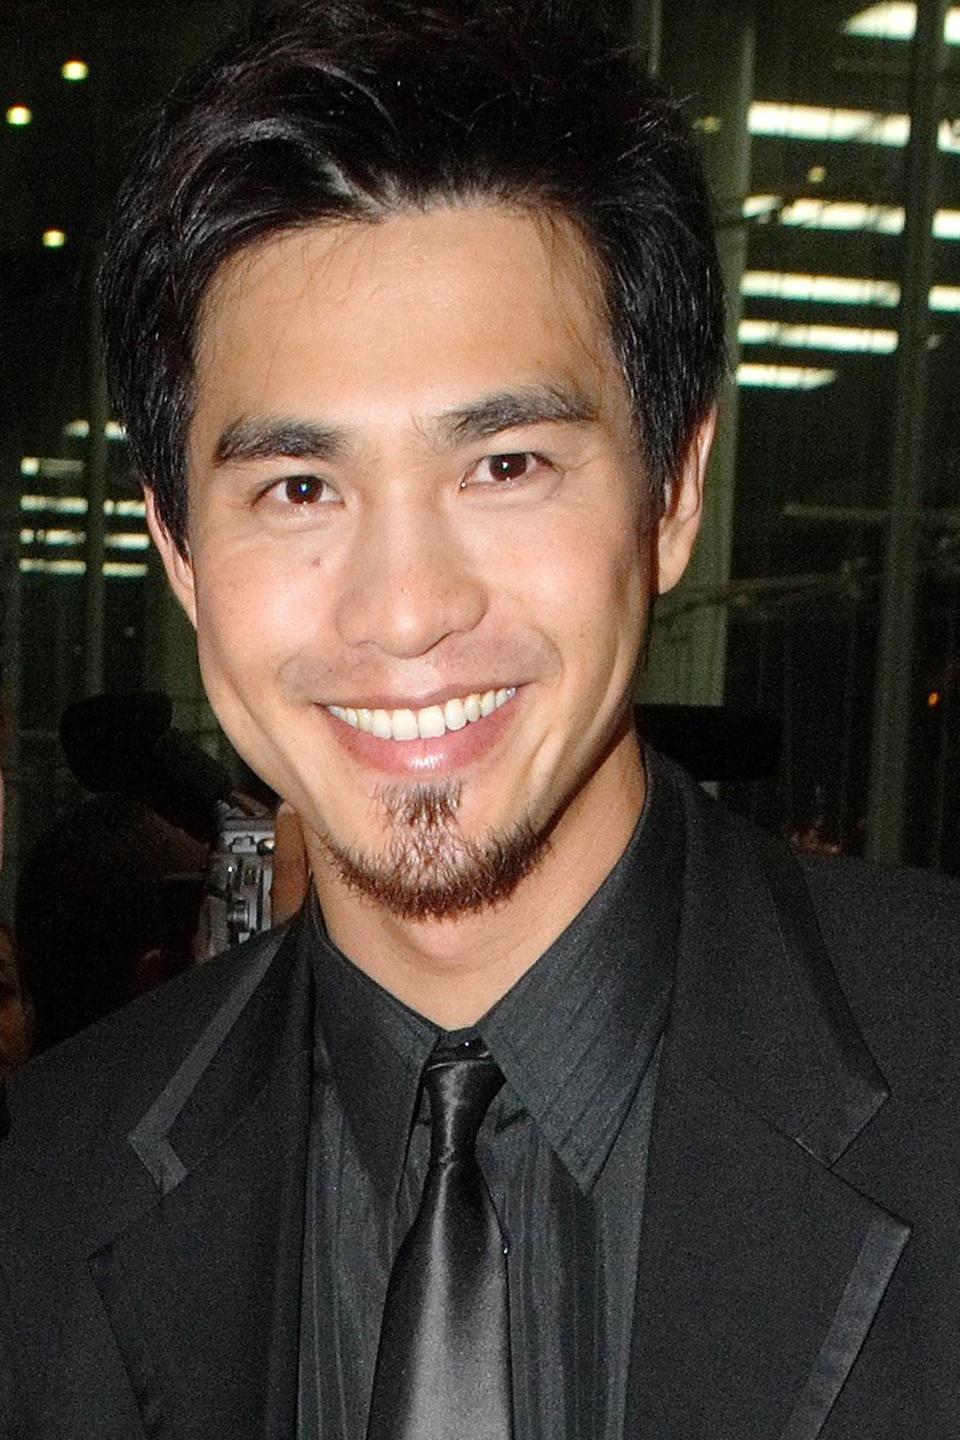 Pierre Png as Michael Teo